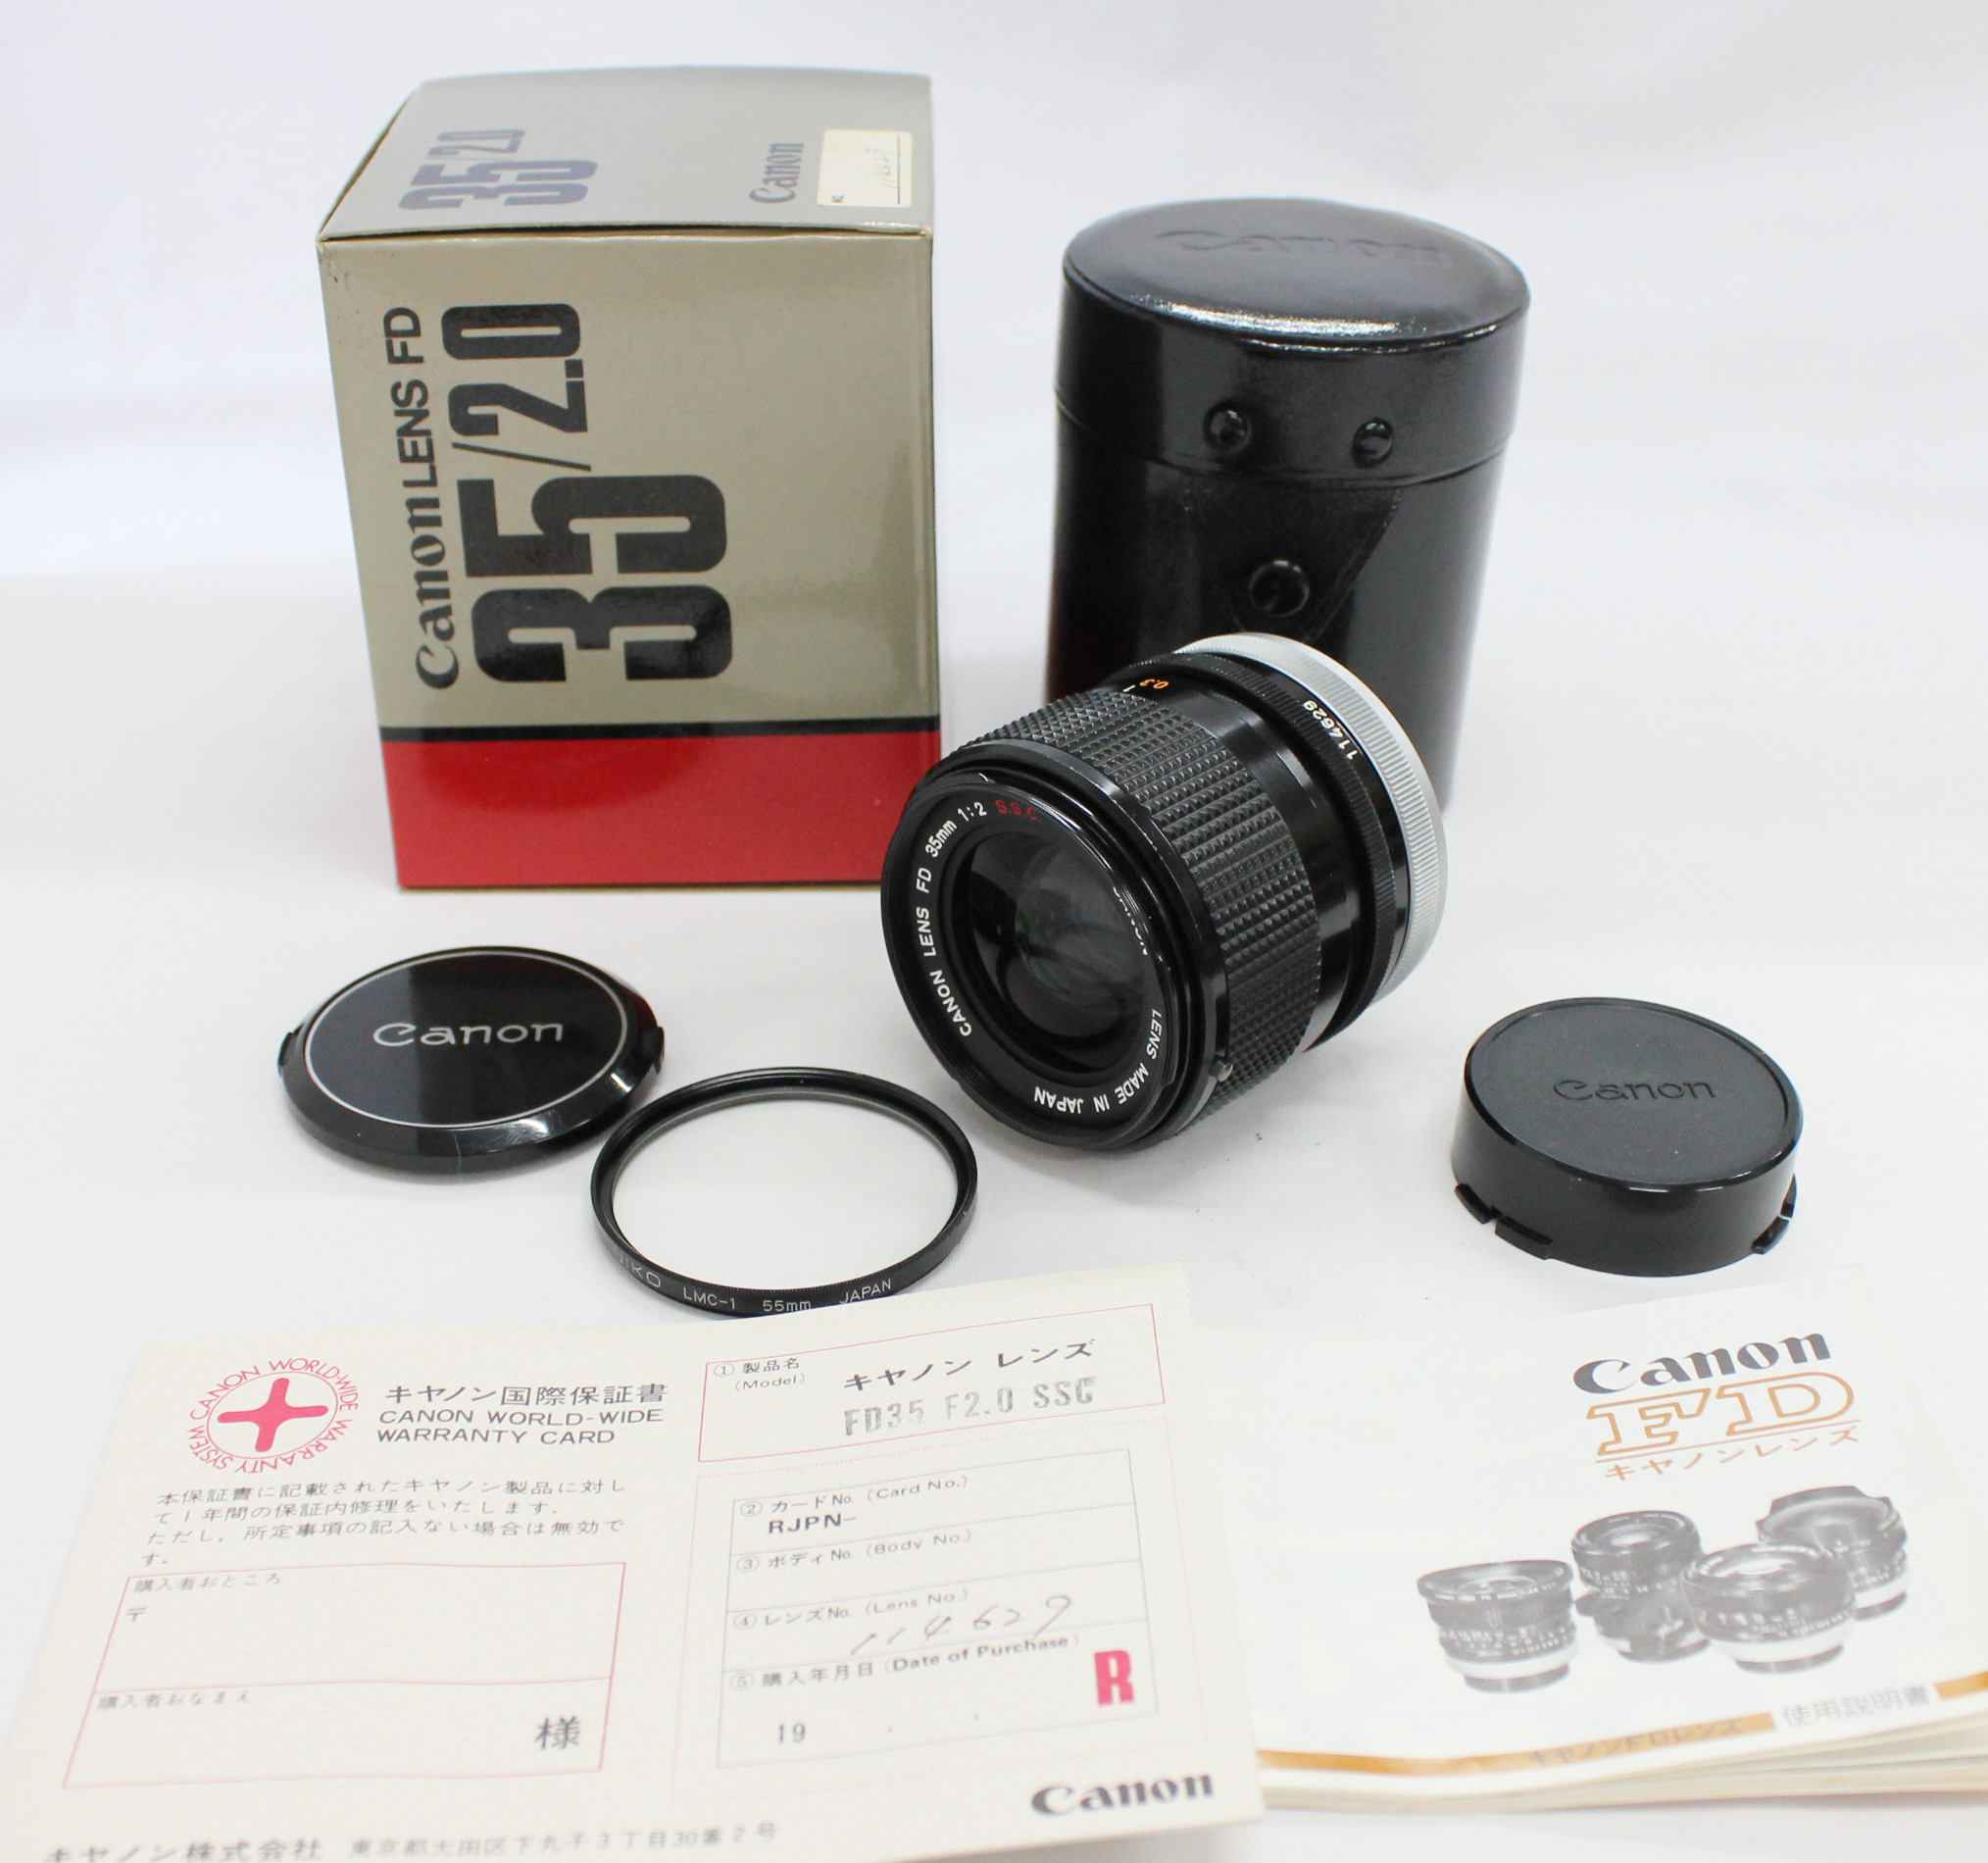 Japan Used Camera Shop | [Mint] Canon FD 35mm F/2 S.S.C SSC Lens with Case and Box from Japan